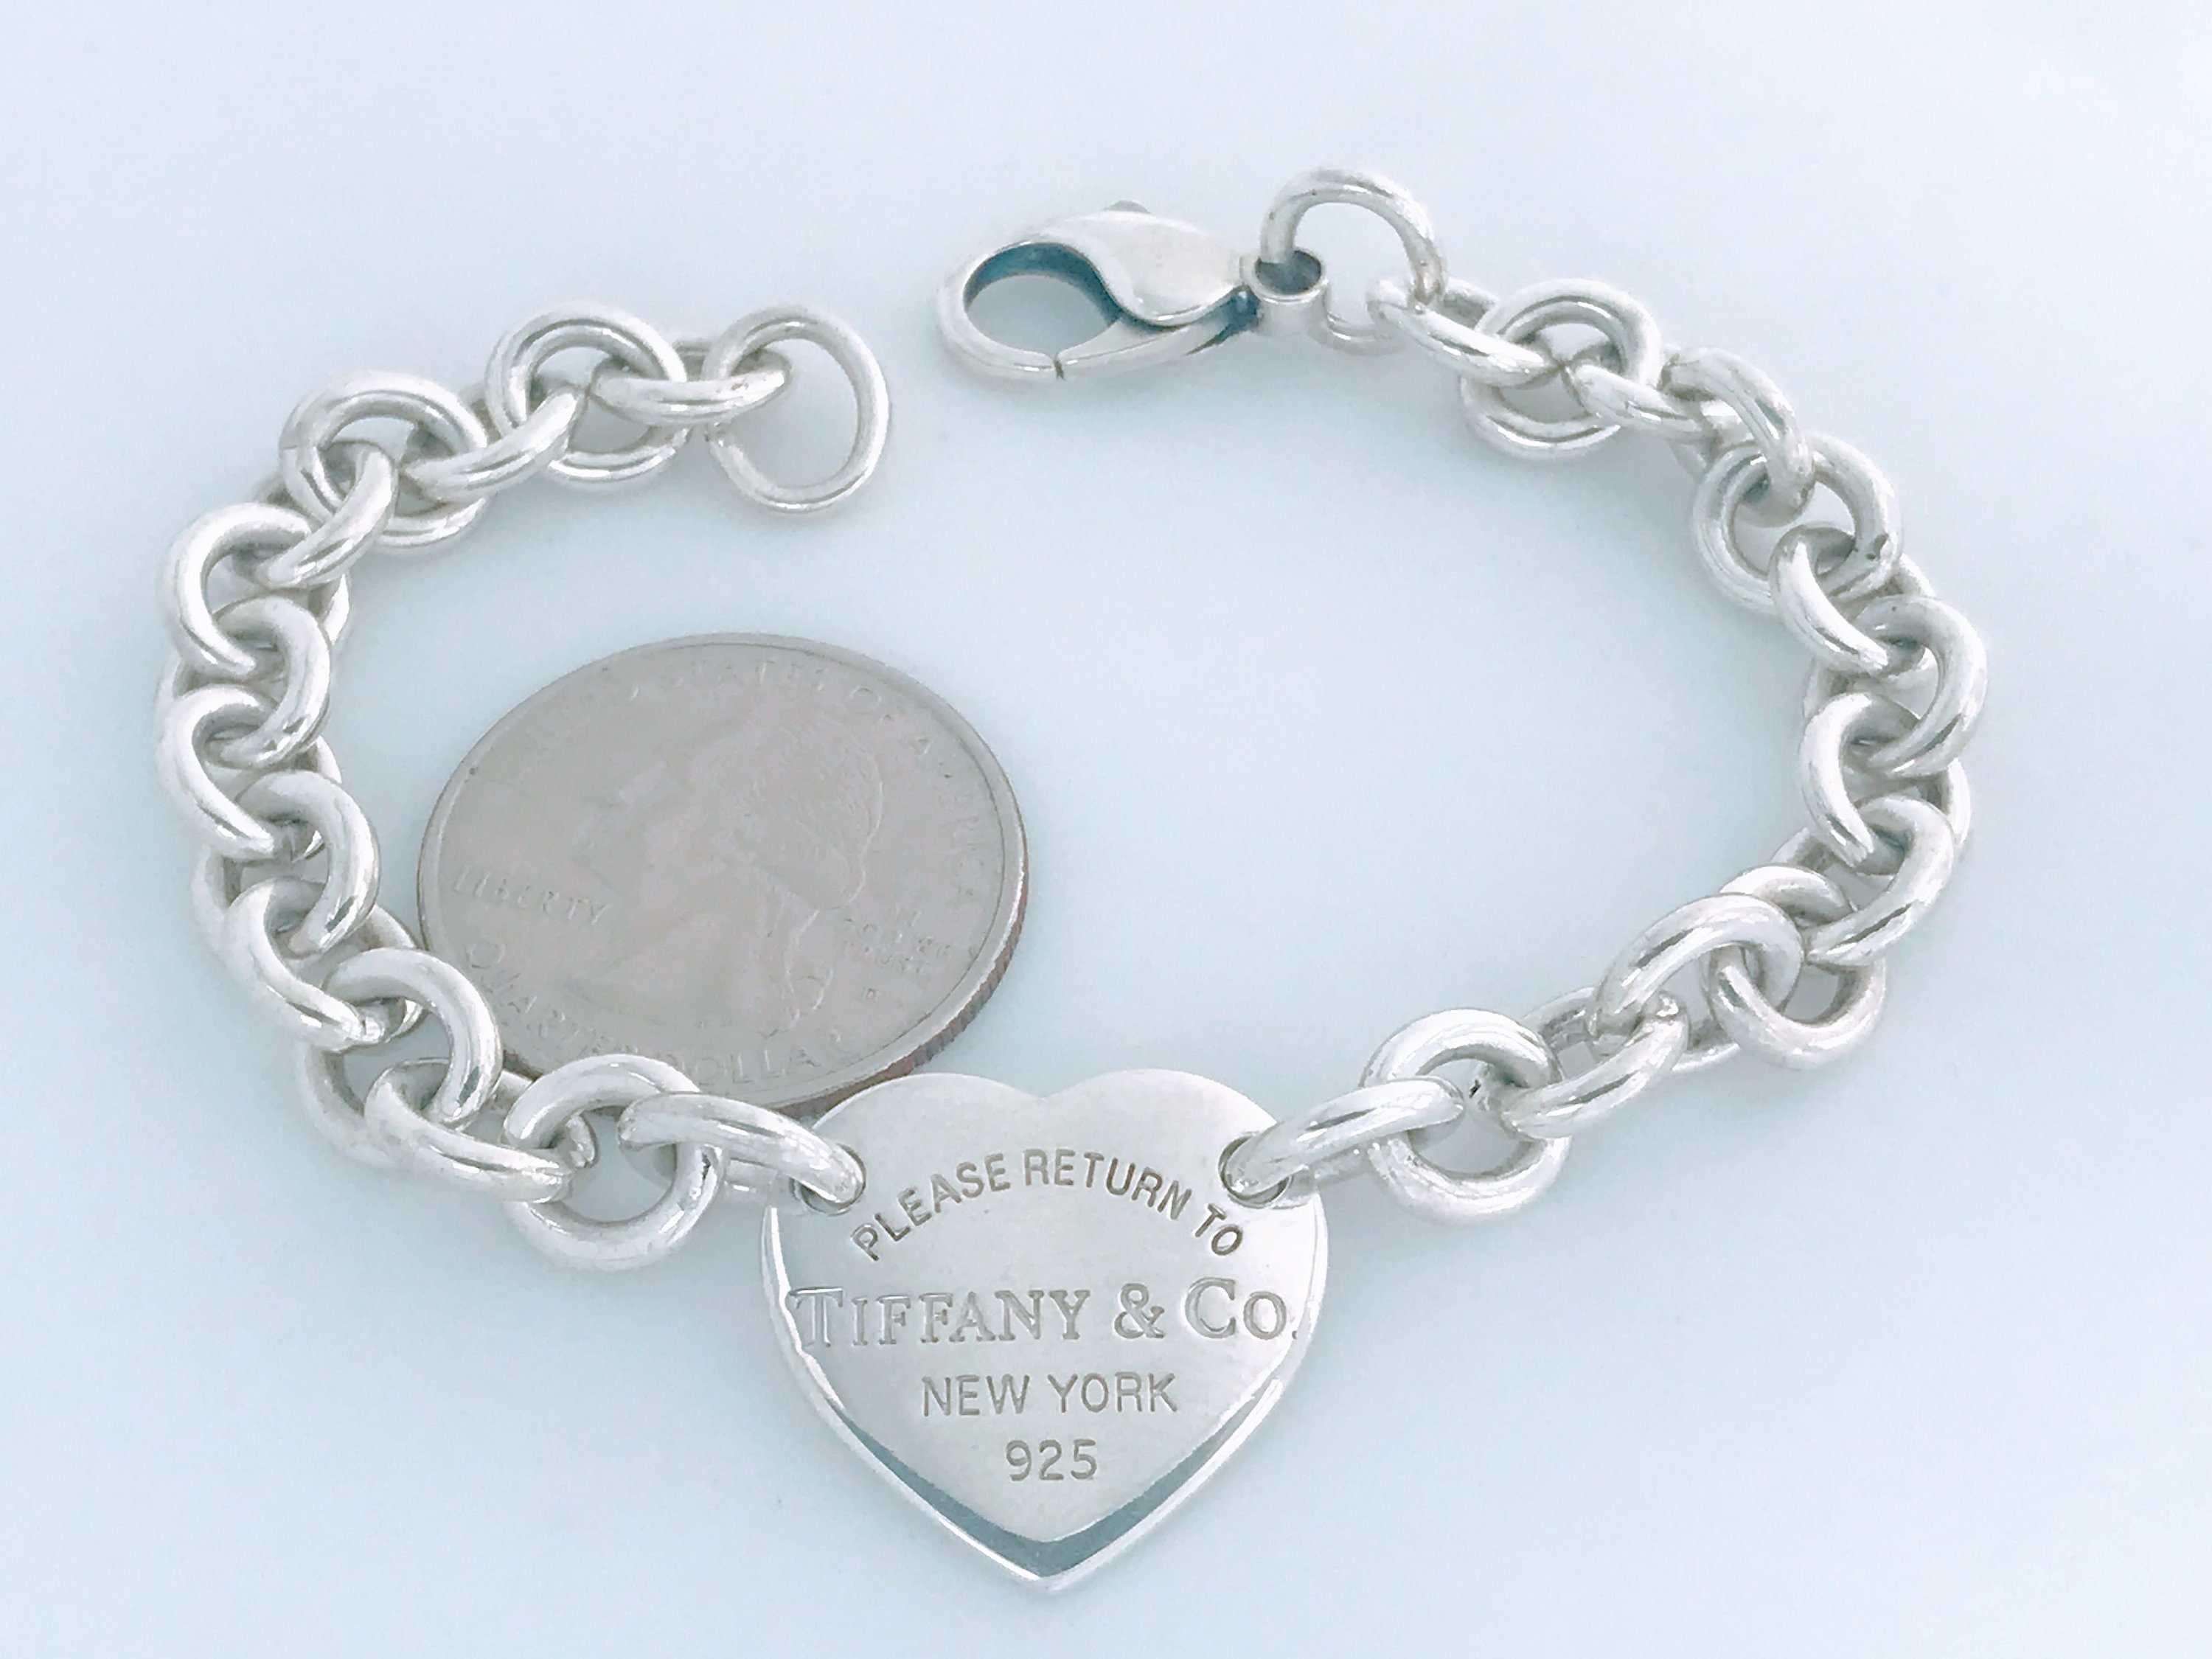 Authentic Tiffany & Co Sterling Silver Heart Tag Charm Bracelet